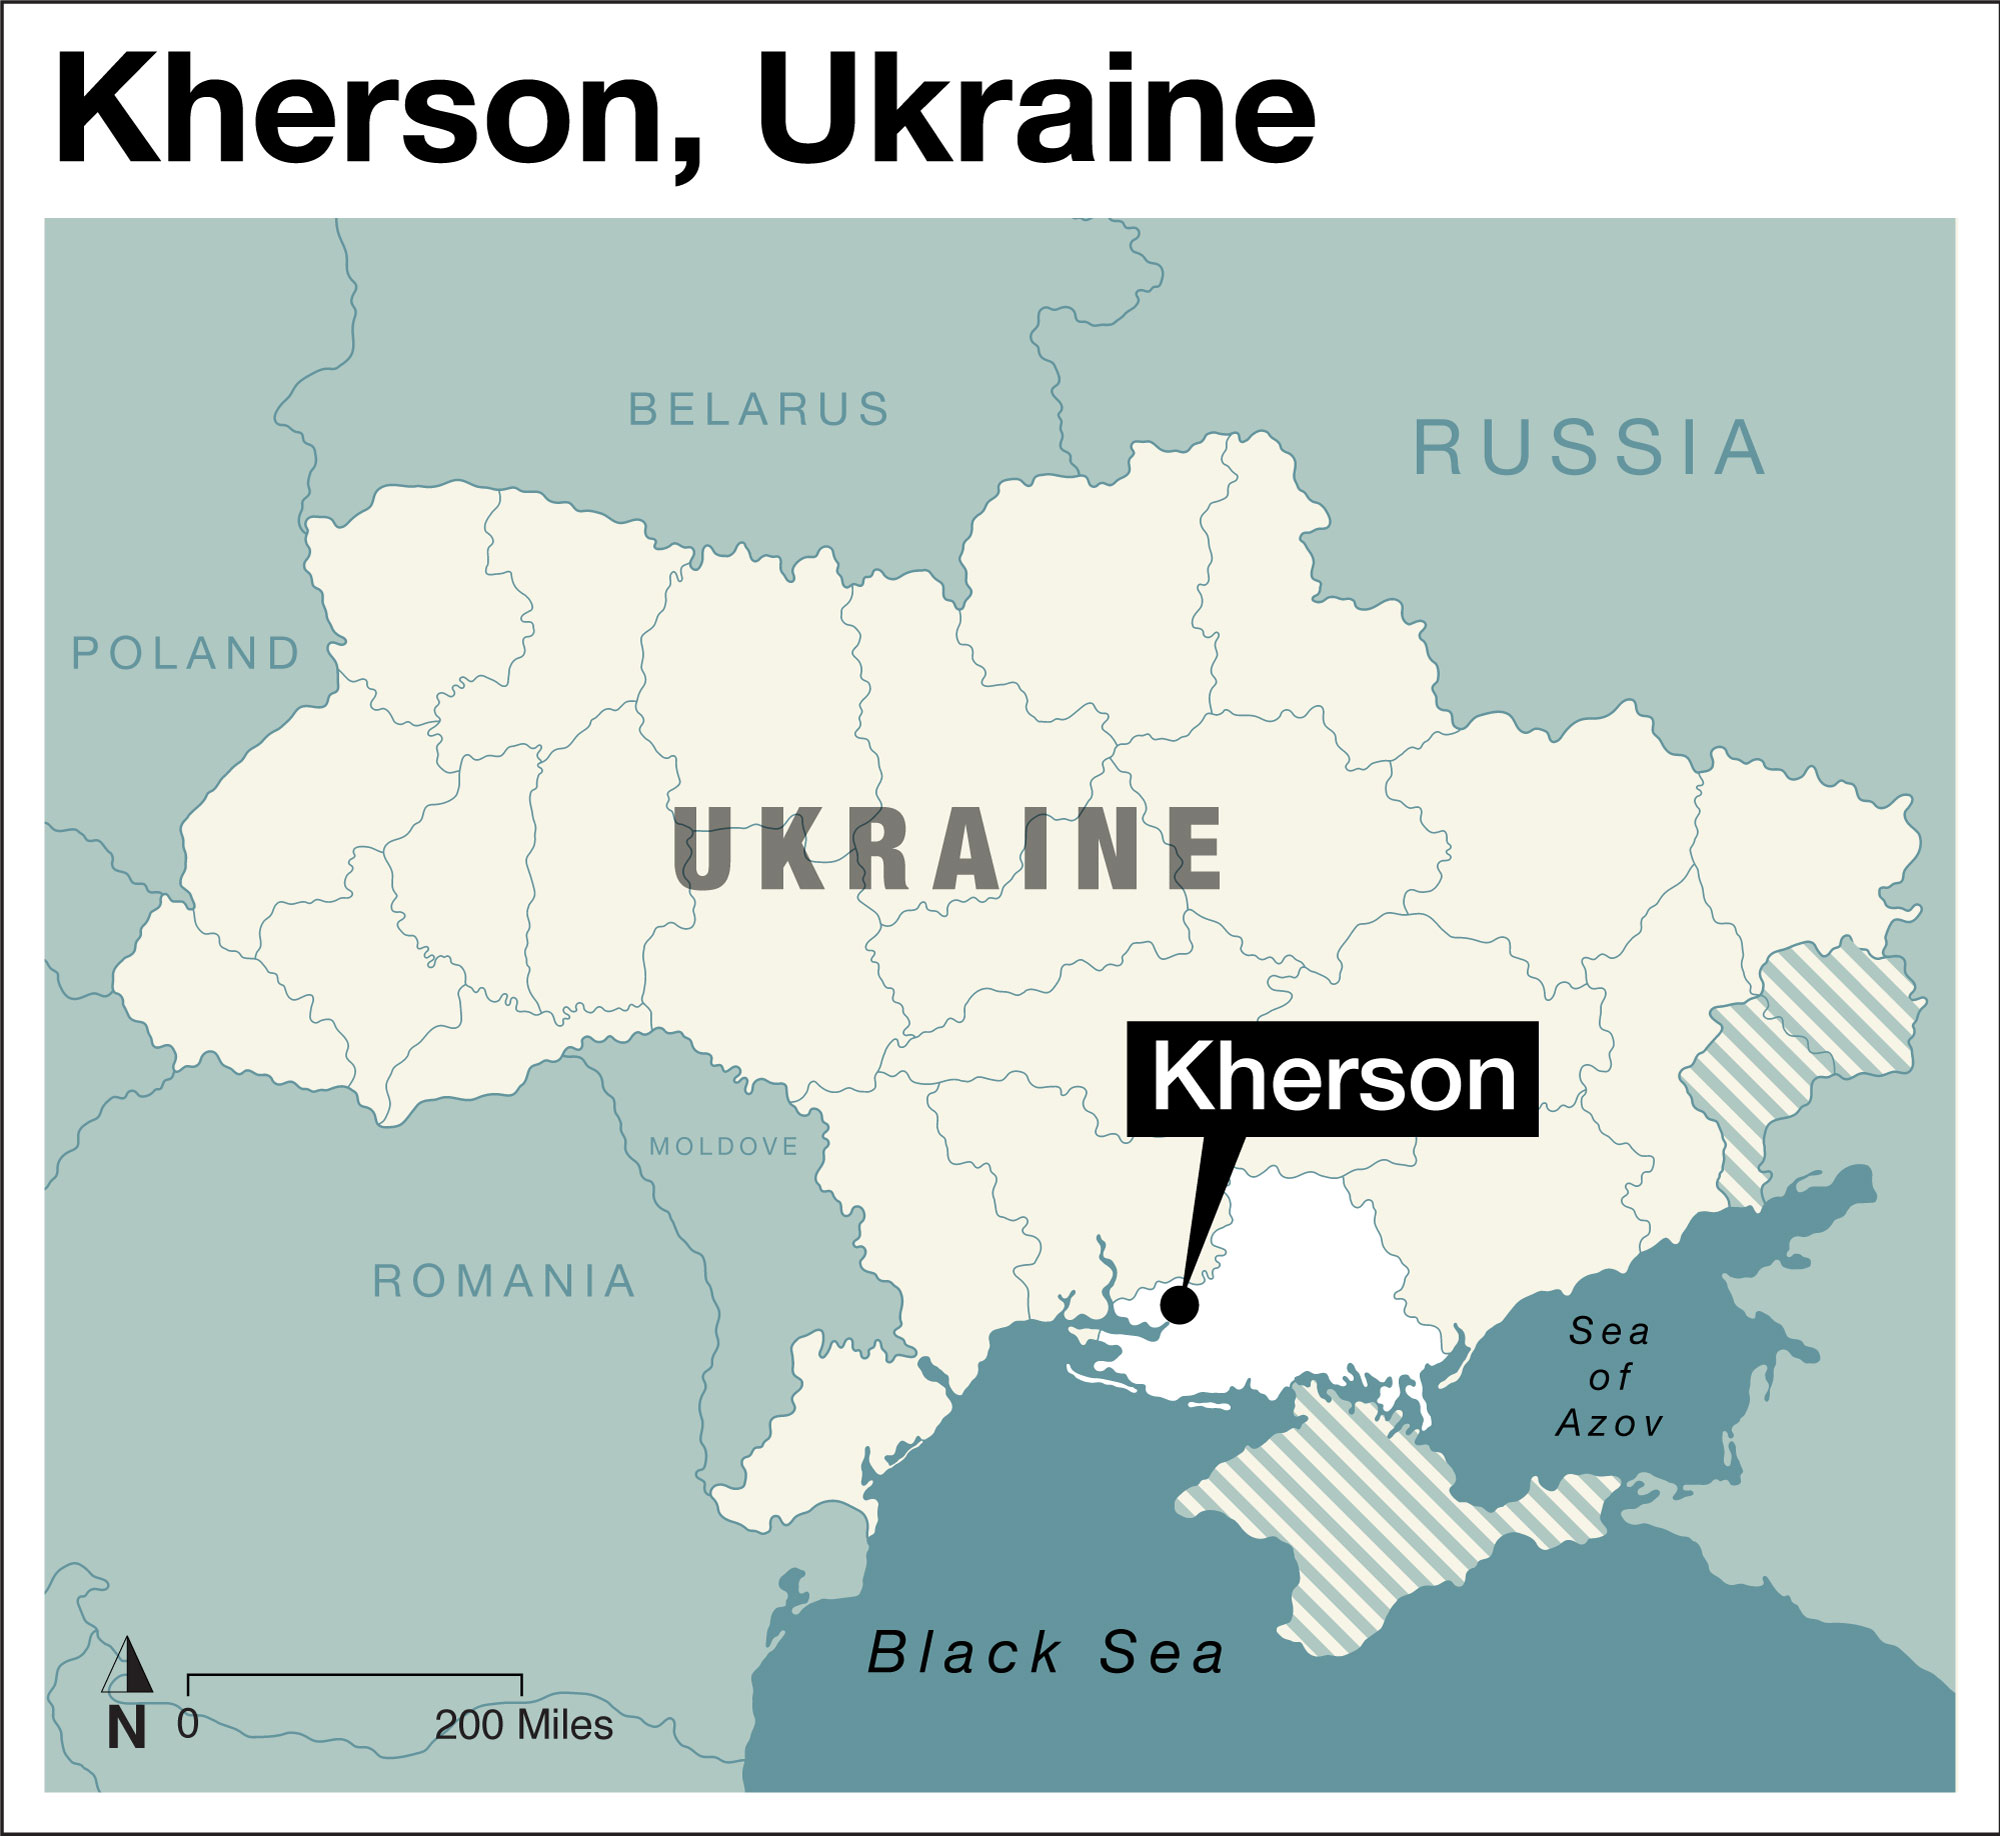 This map shows the location of the Kherson region of Ukraine.